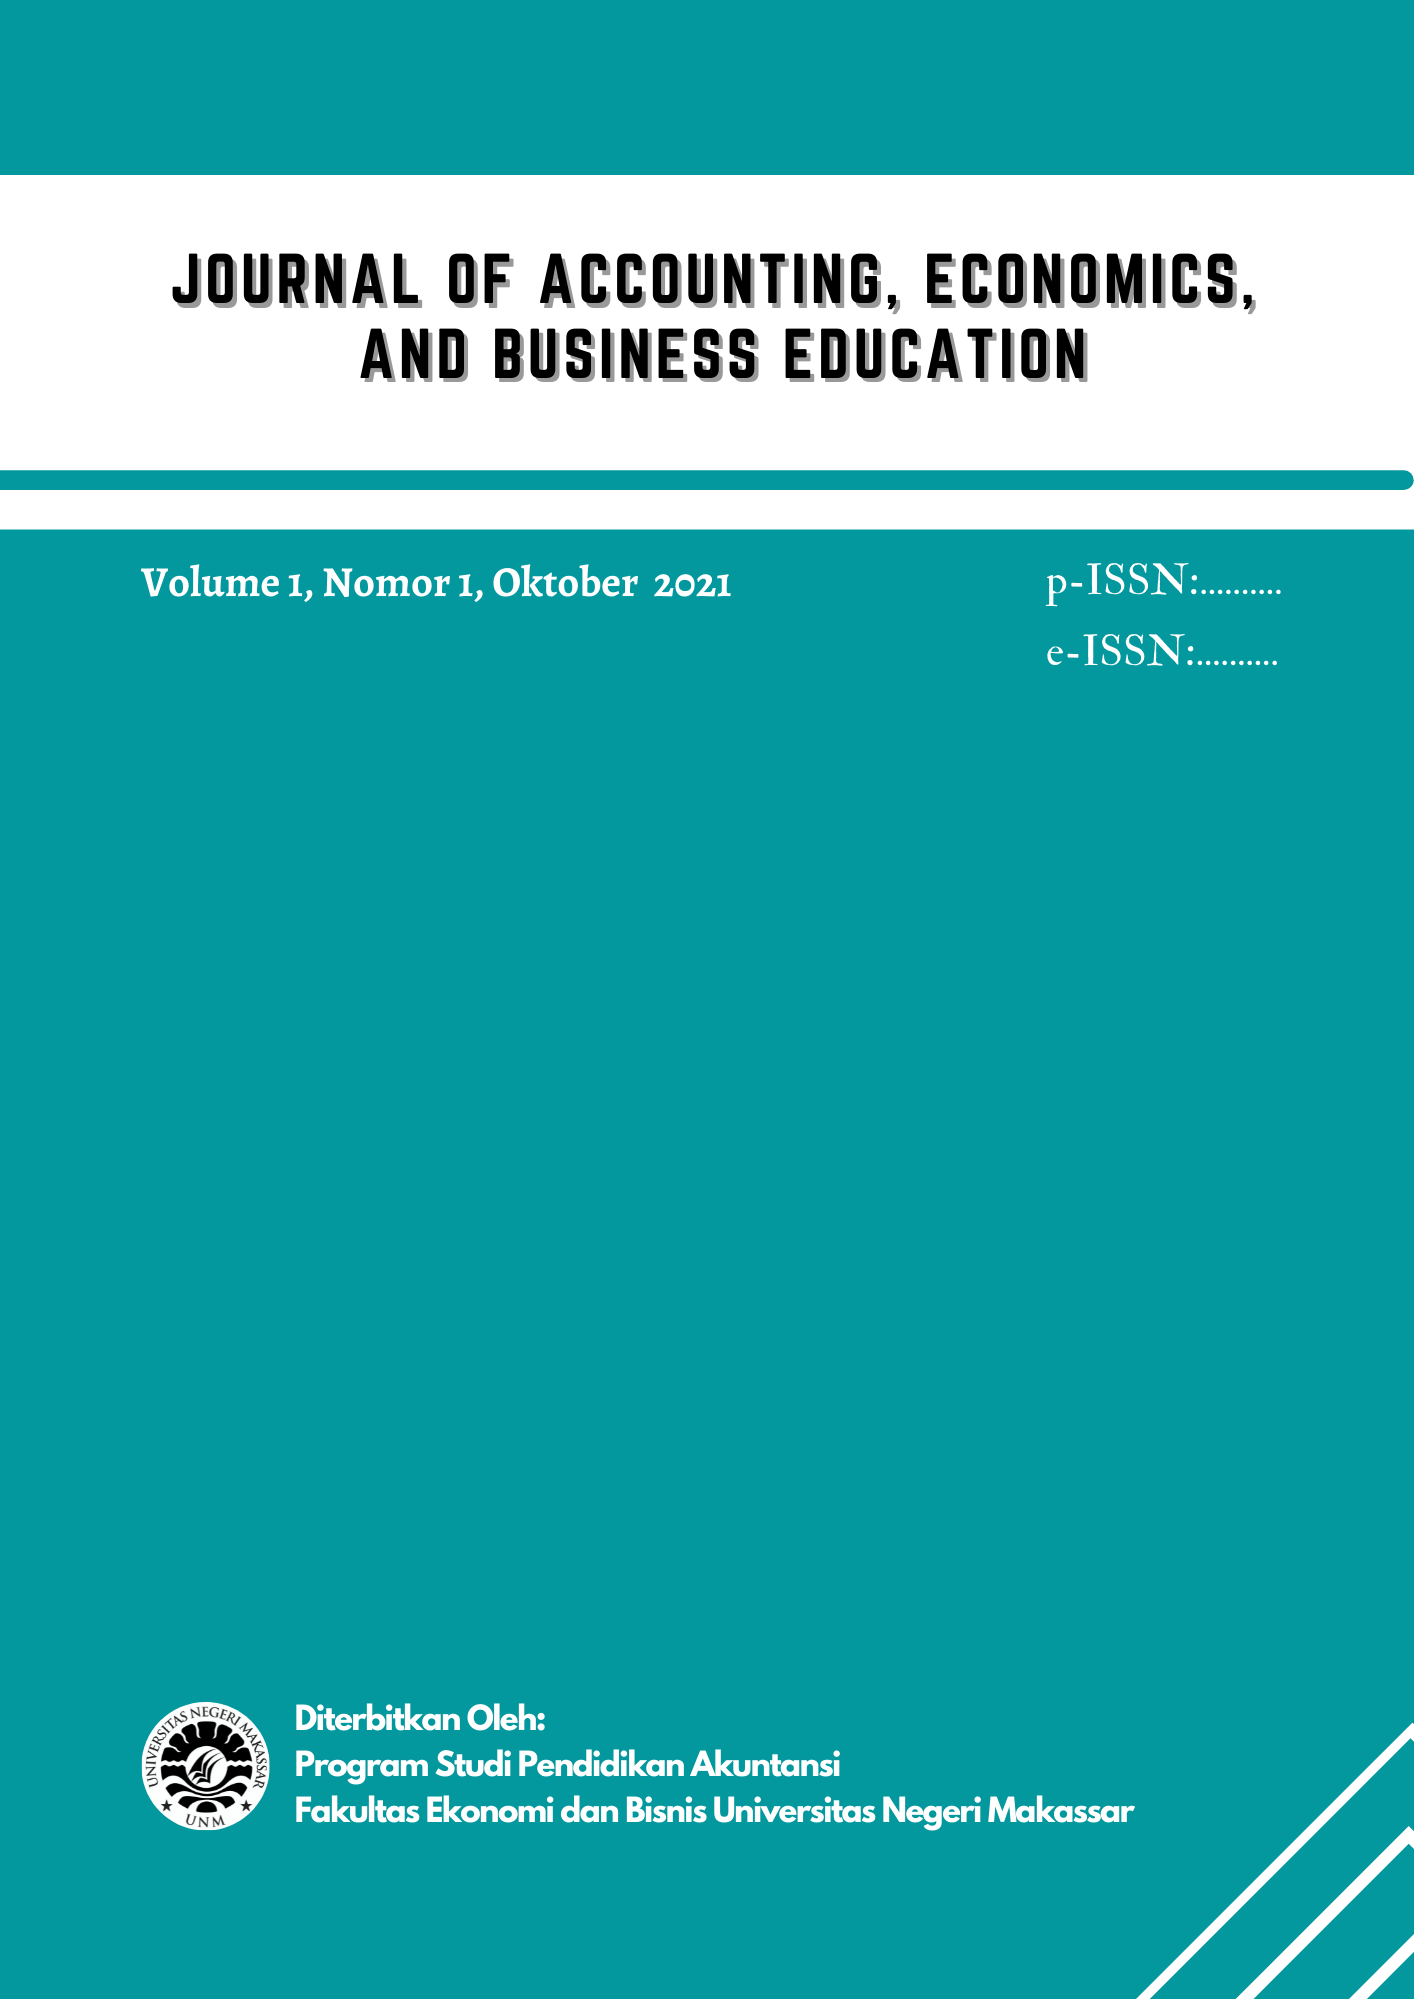 Journal of Accounting, Economics, and Business Education